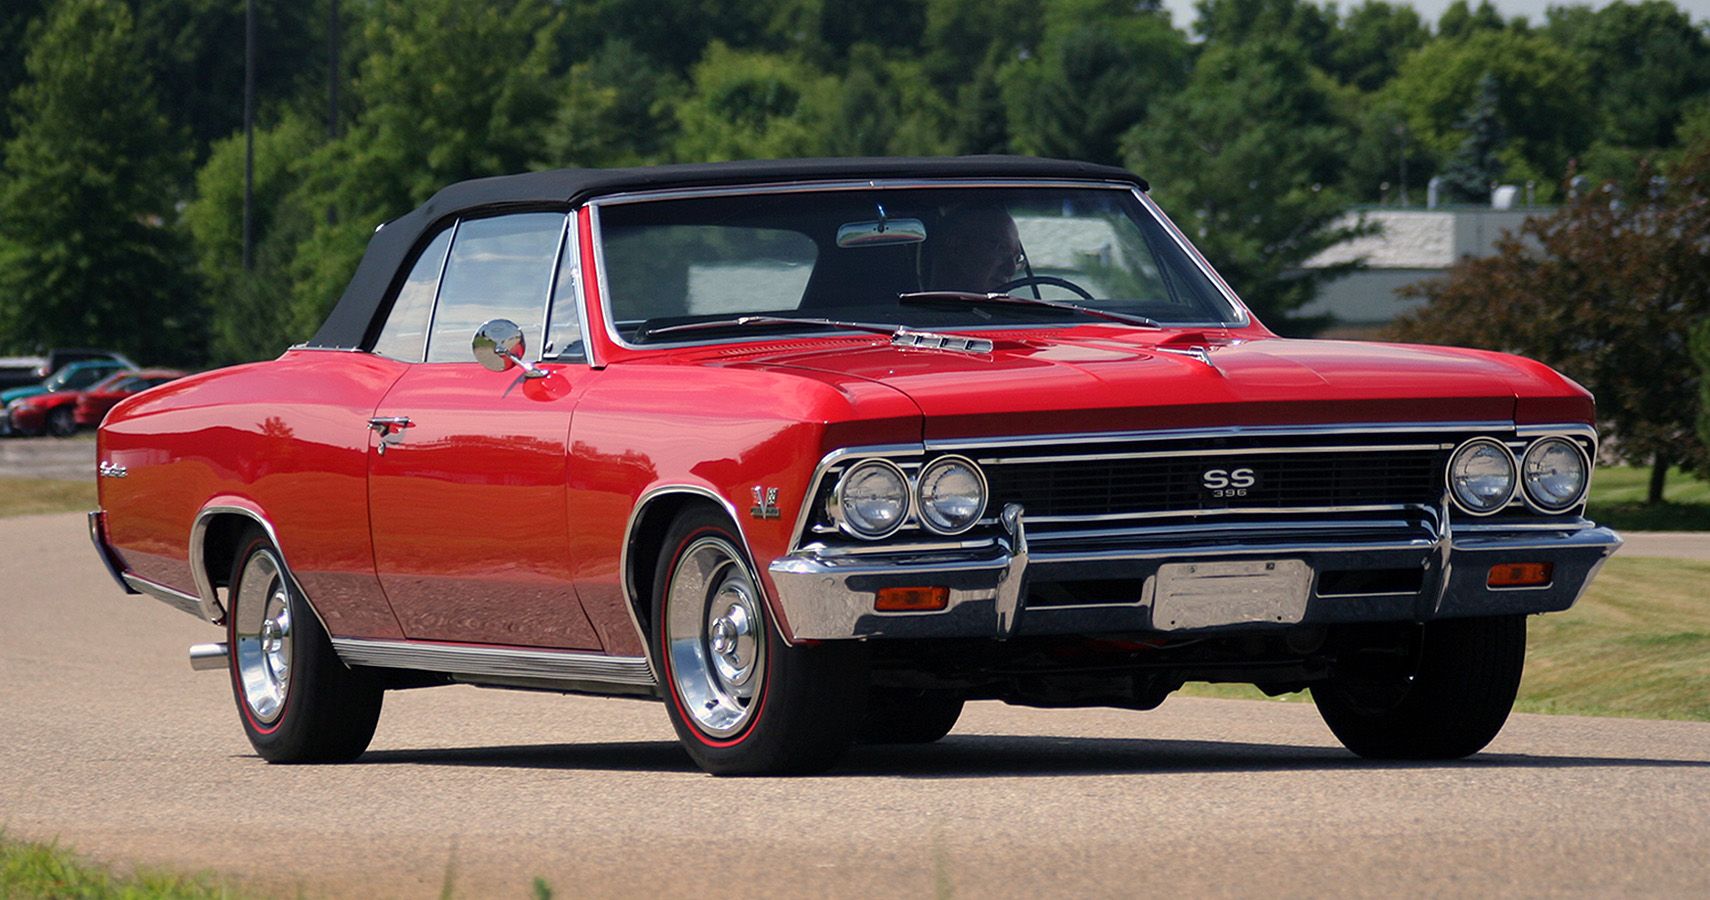 Stunning Red 1966 Chevrolet Chevelle Convertible